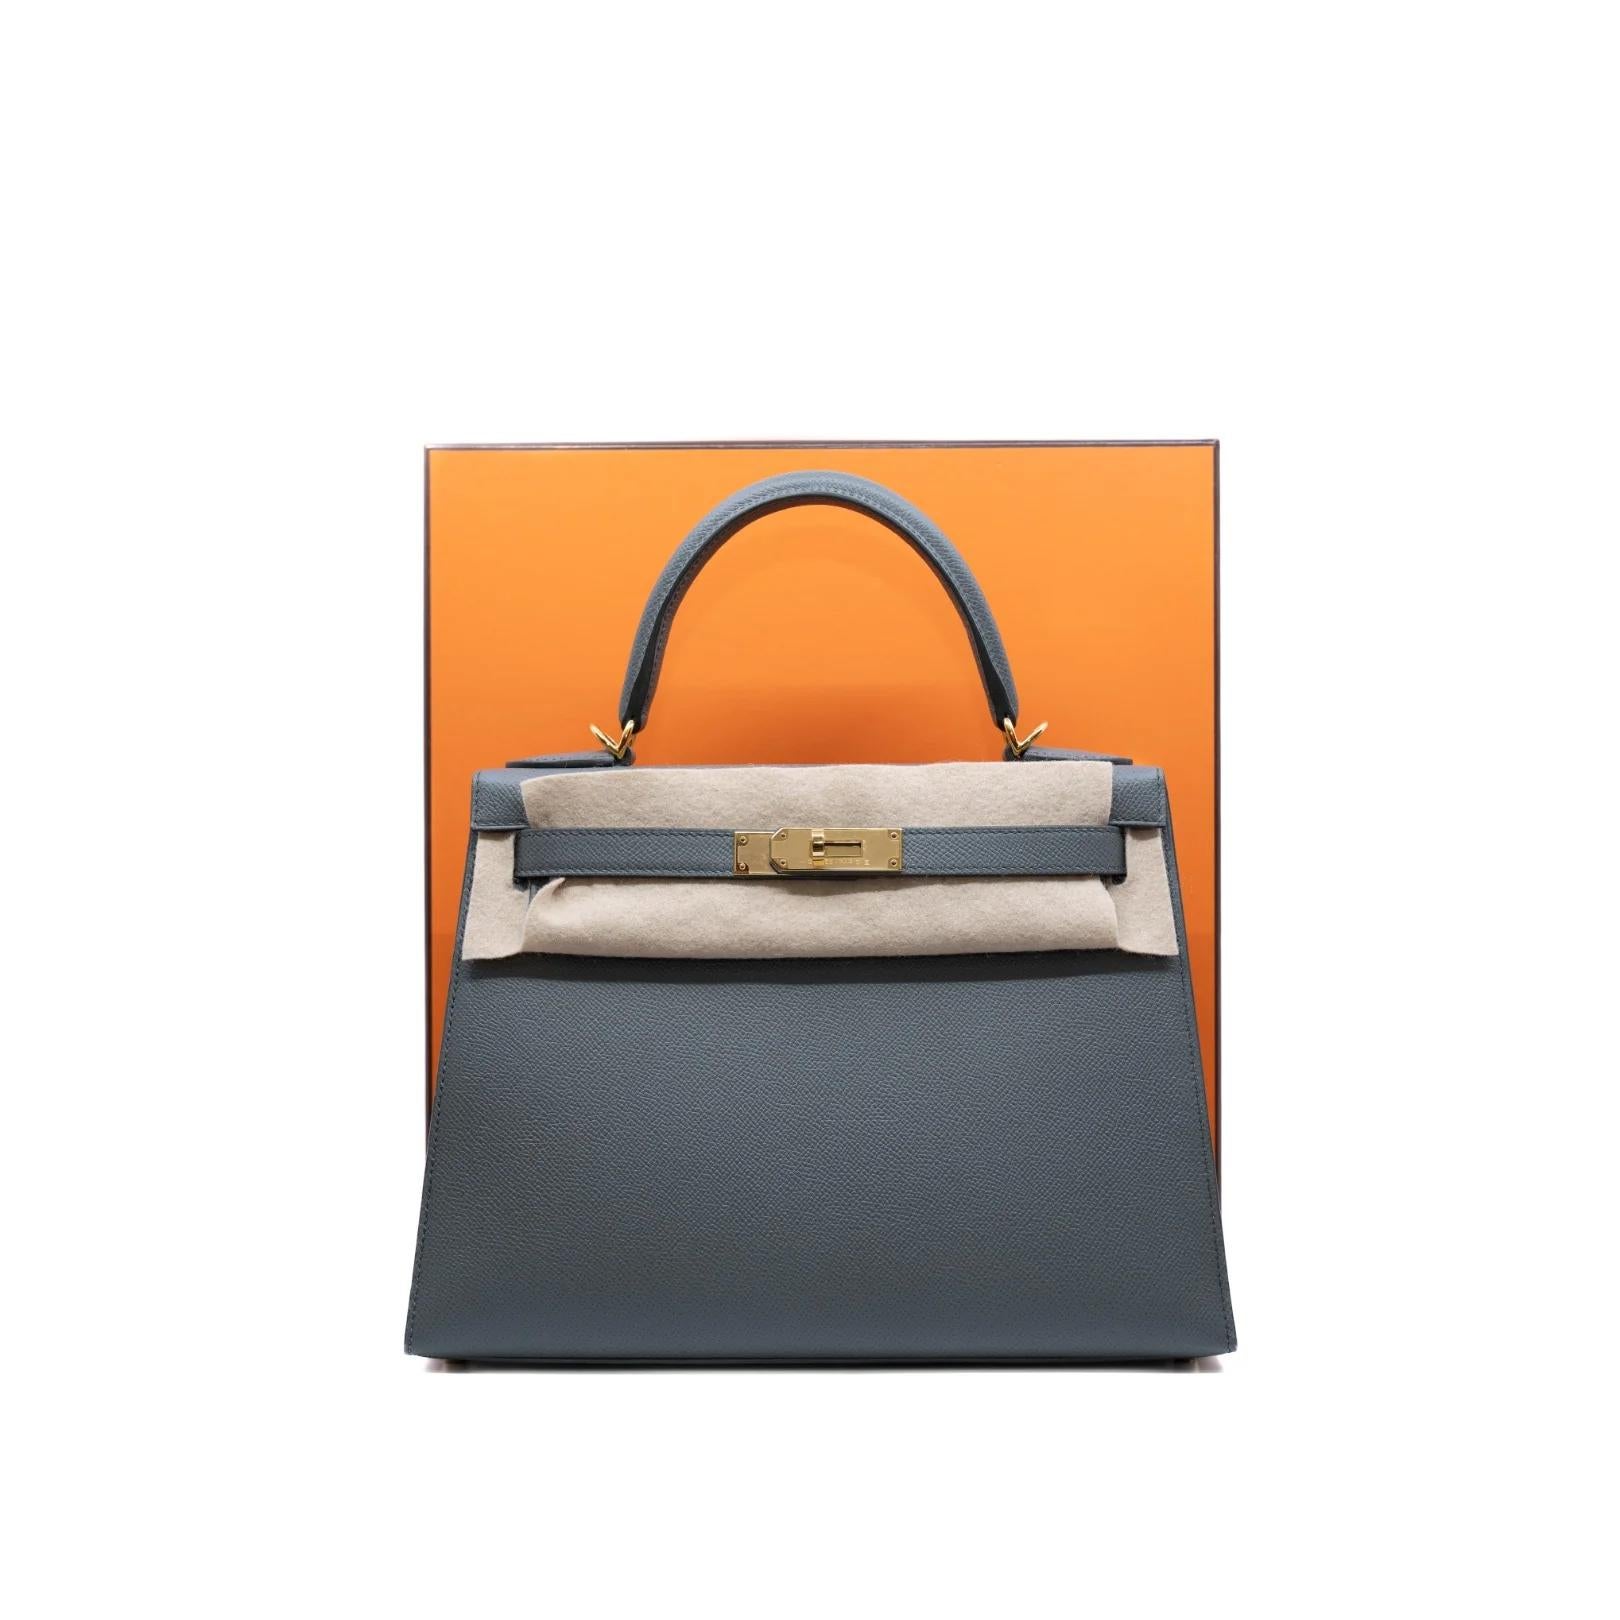 1stdibs Exclusives From Three Over Six

The brand new Hermès Kelly Sellier 28cm in Vert Amande Epsom Leather with Gold Hardware is an exquisite testament to the timeless elegance and craftsmanship for which Hermès is renowned. This stunning bag,